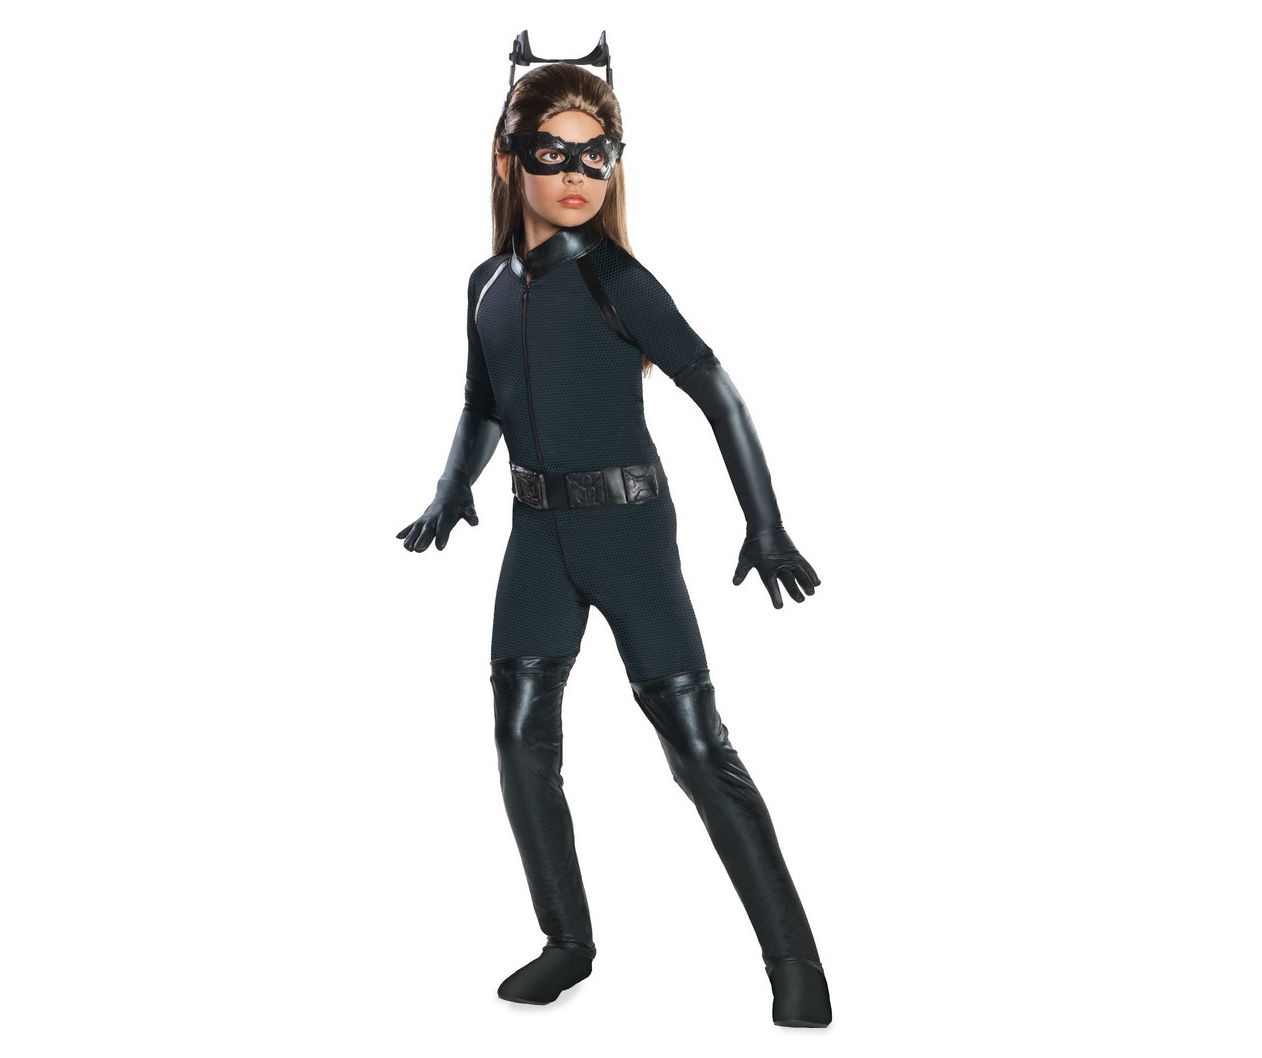 Toddlers 2-4T The Dark Knight Rises Deluxe Catwoman Costume